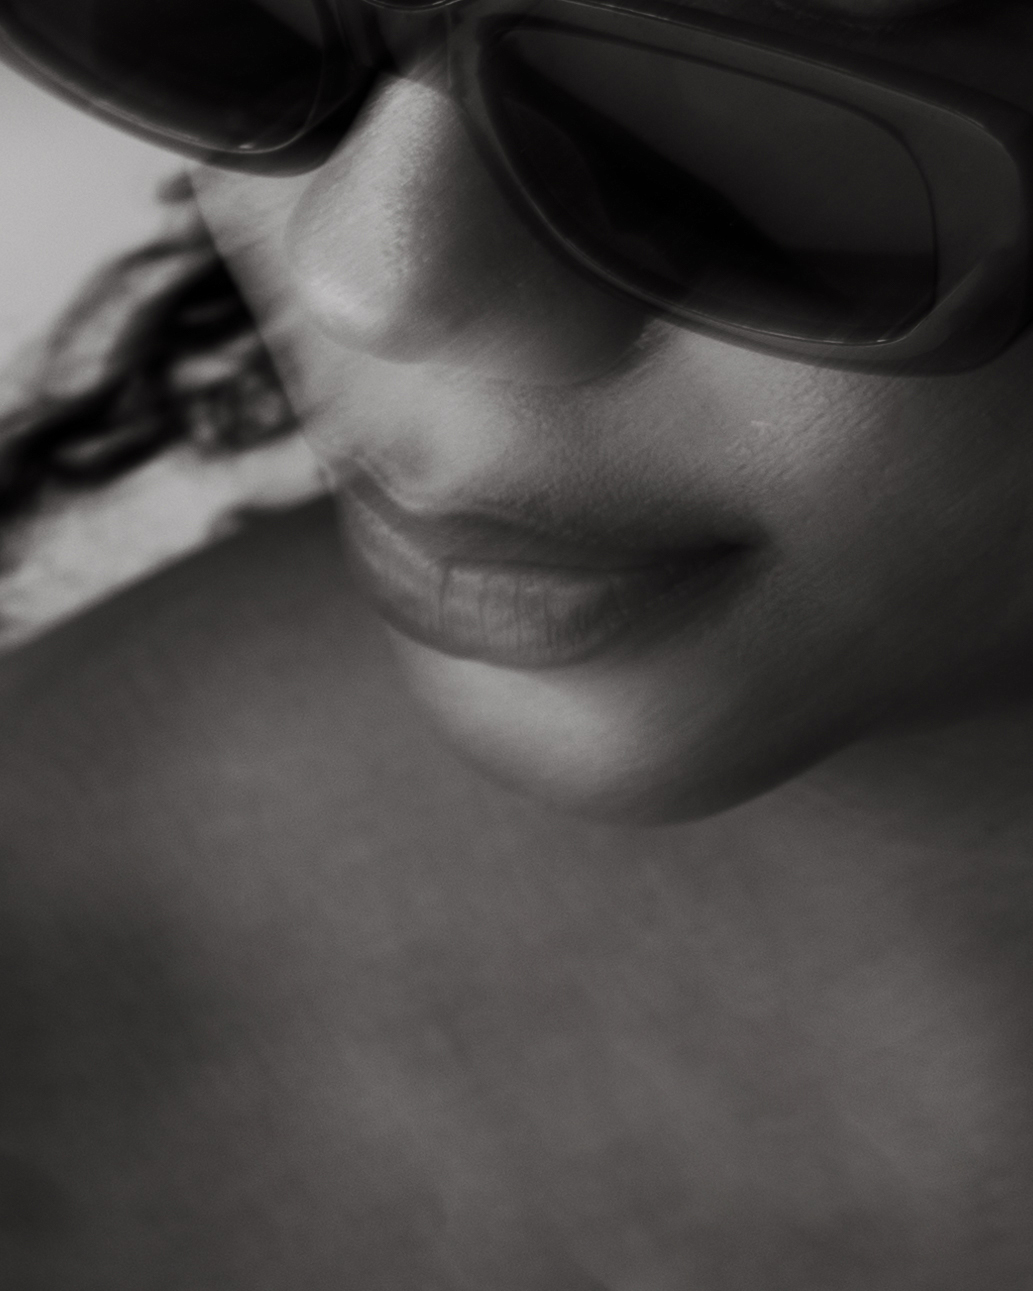 Lauren with a close-up of a wearing sunglasses
